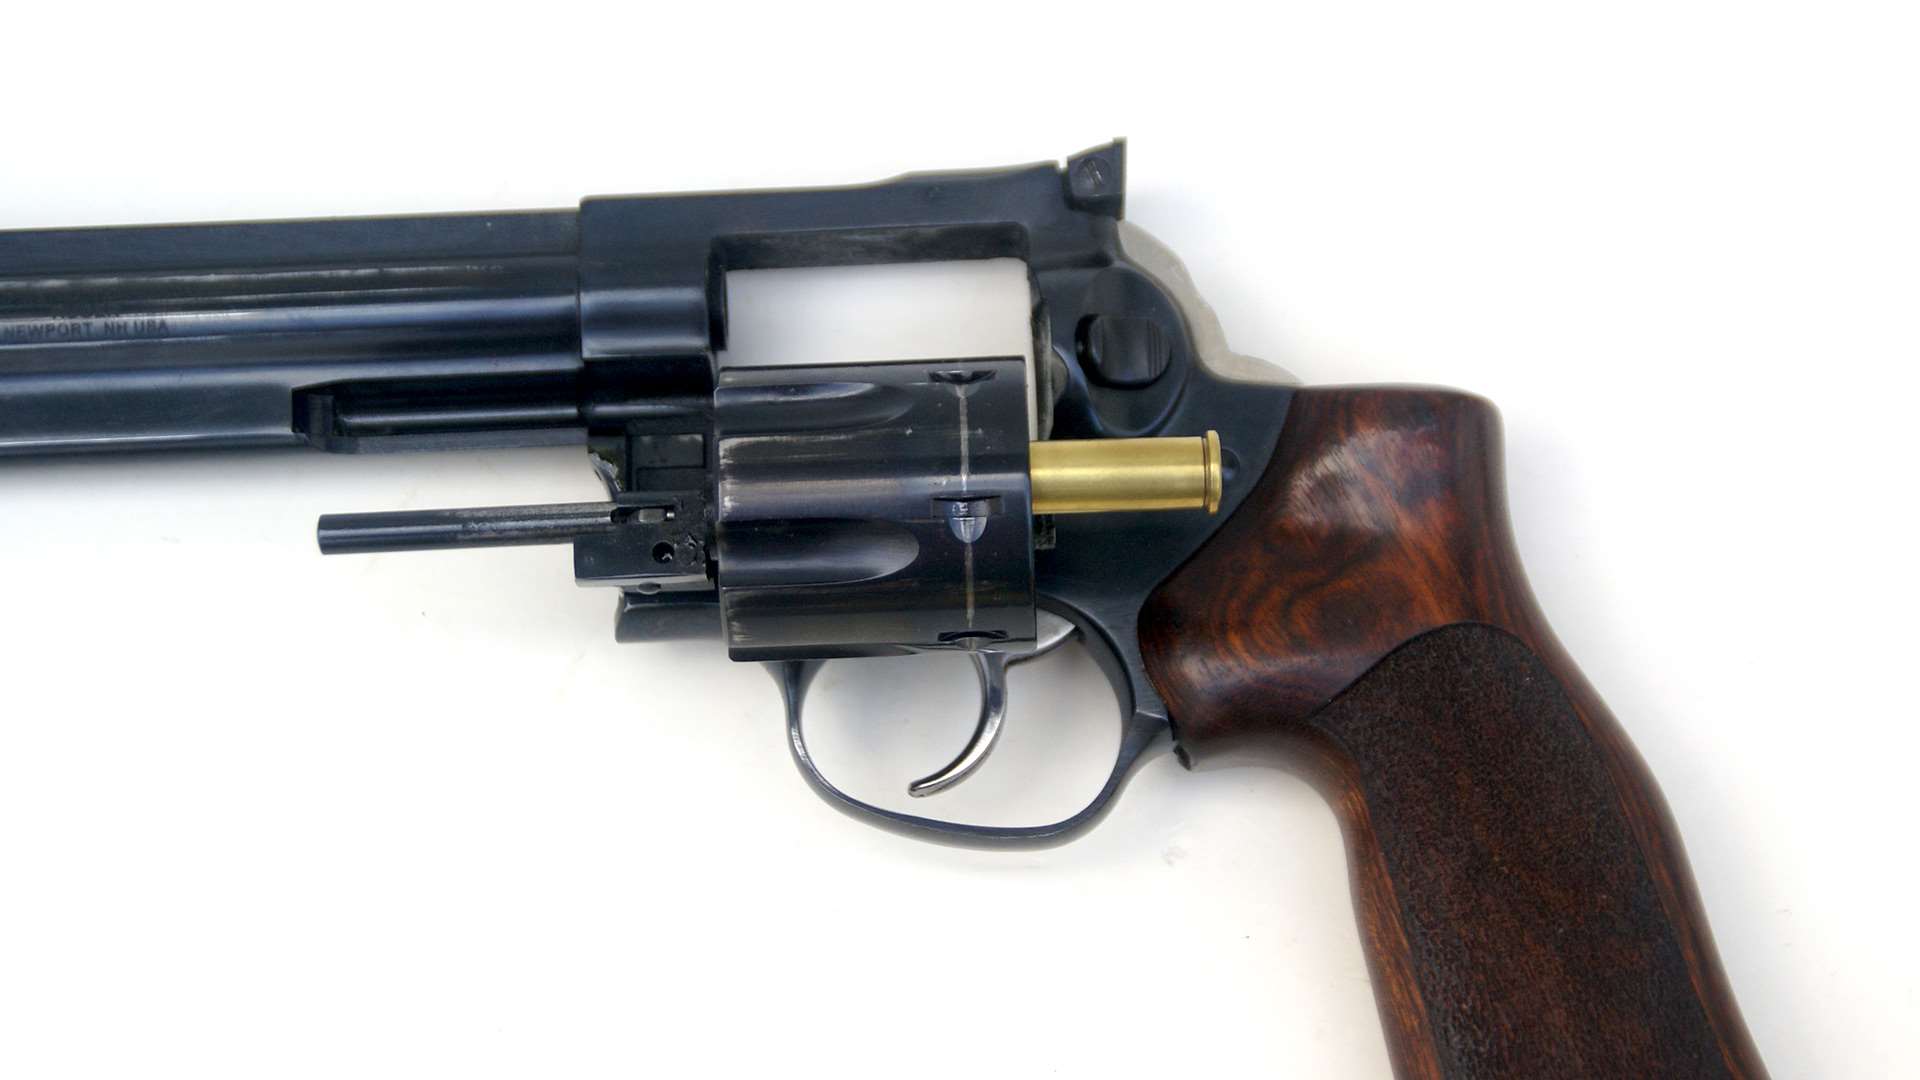 Full-length ejector rod stroke on a revolver